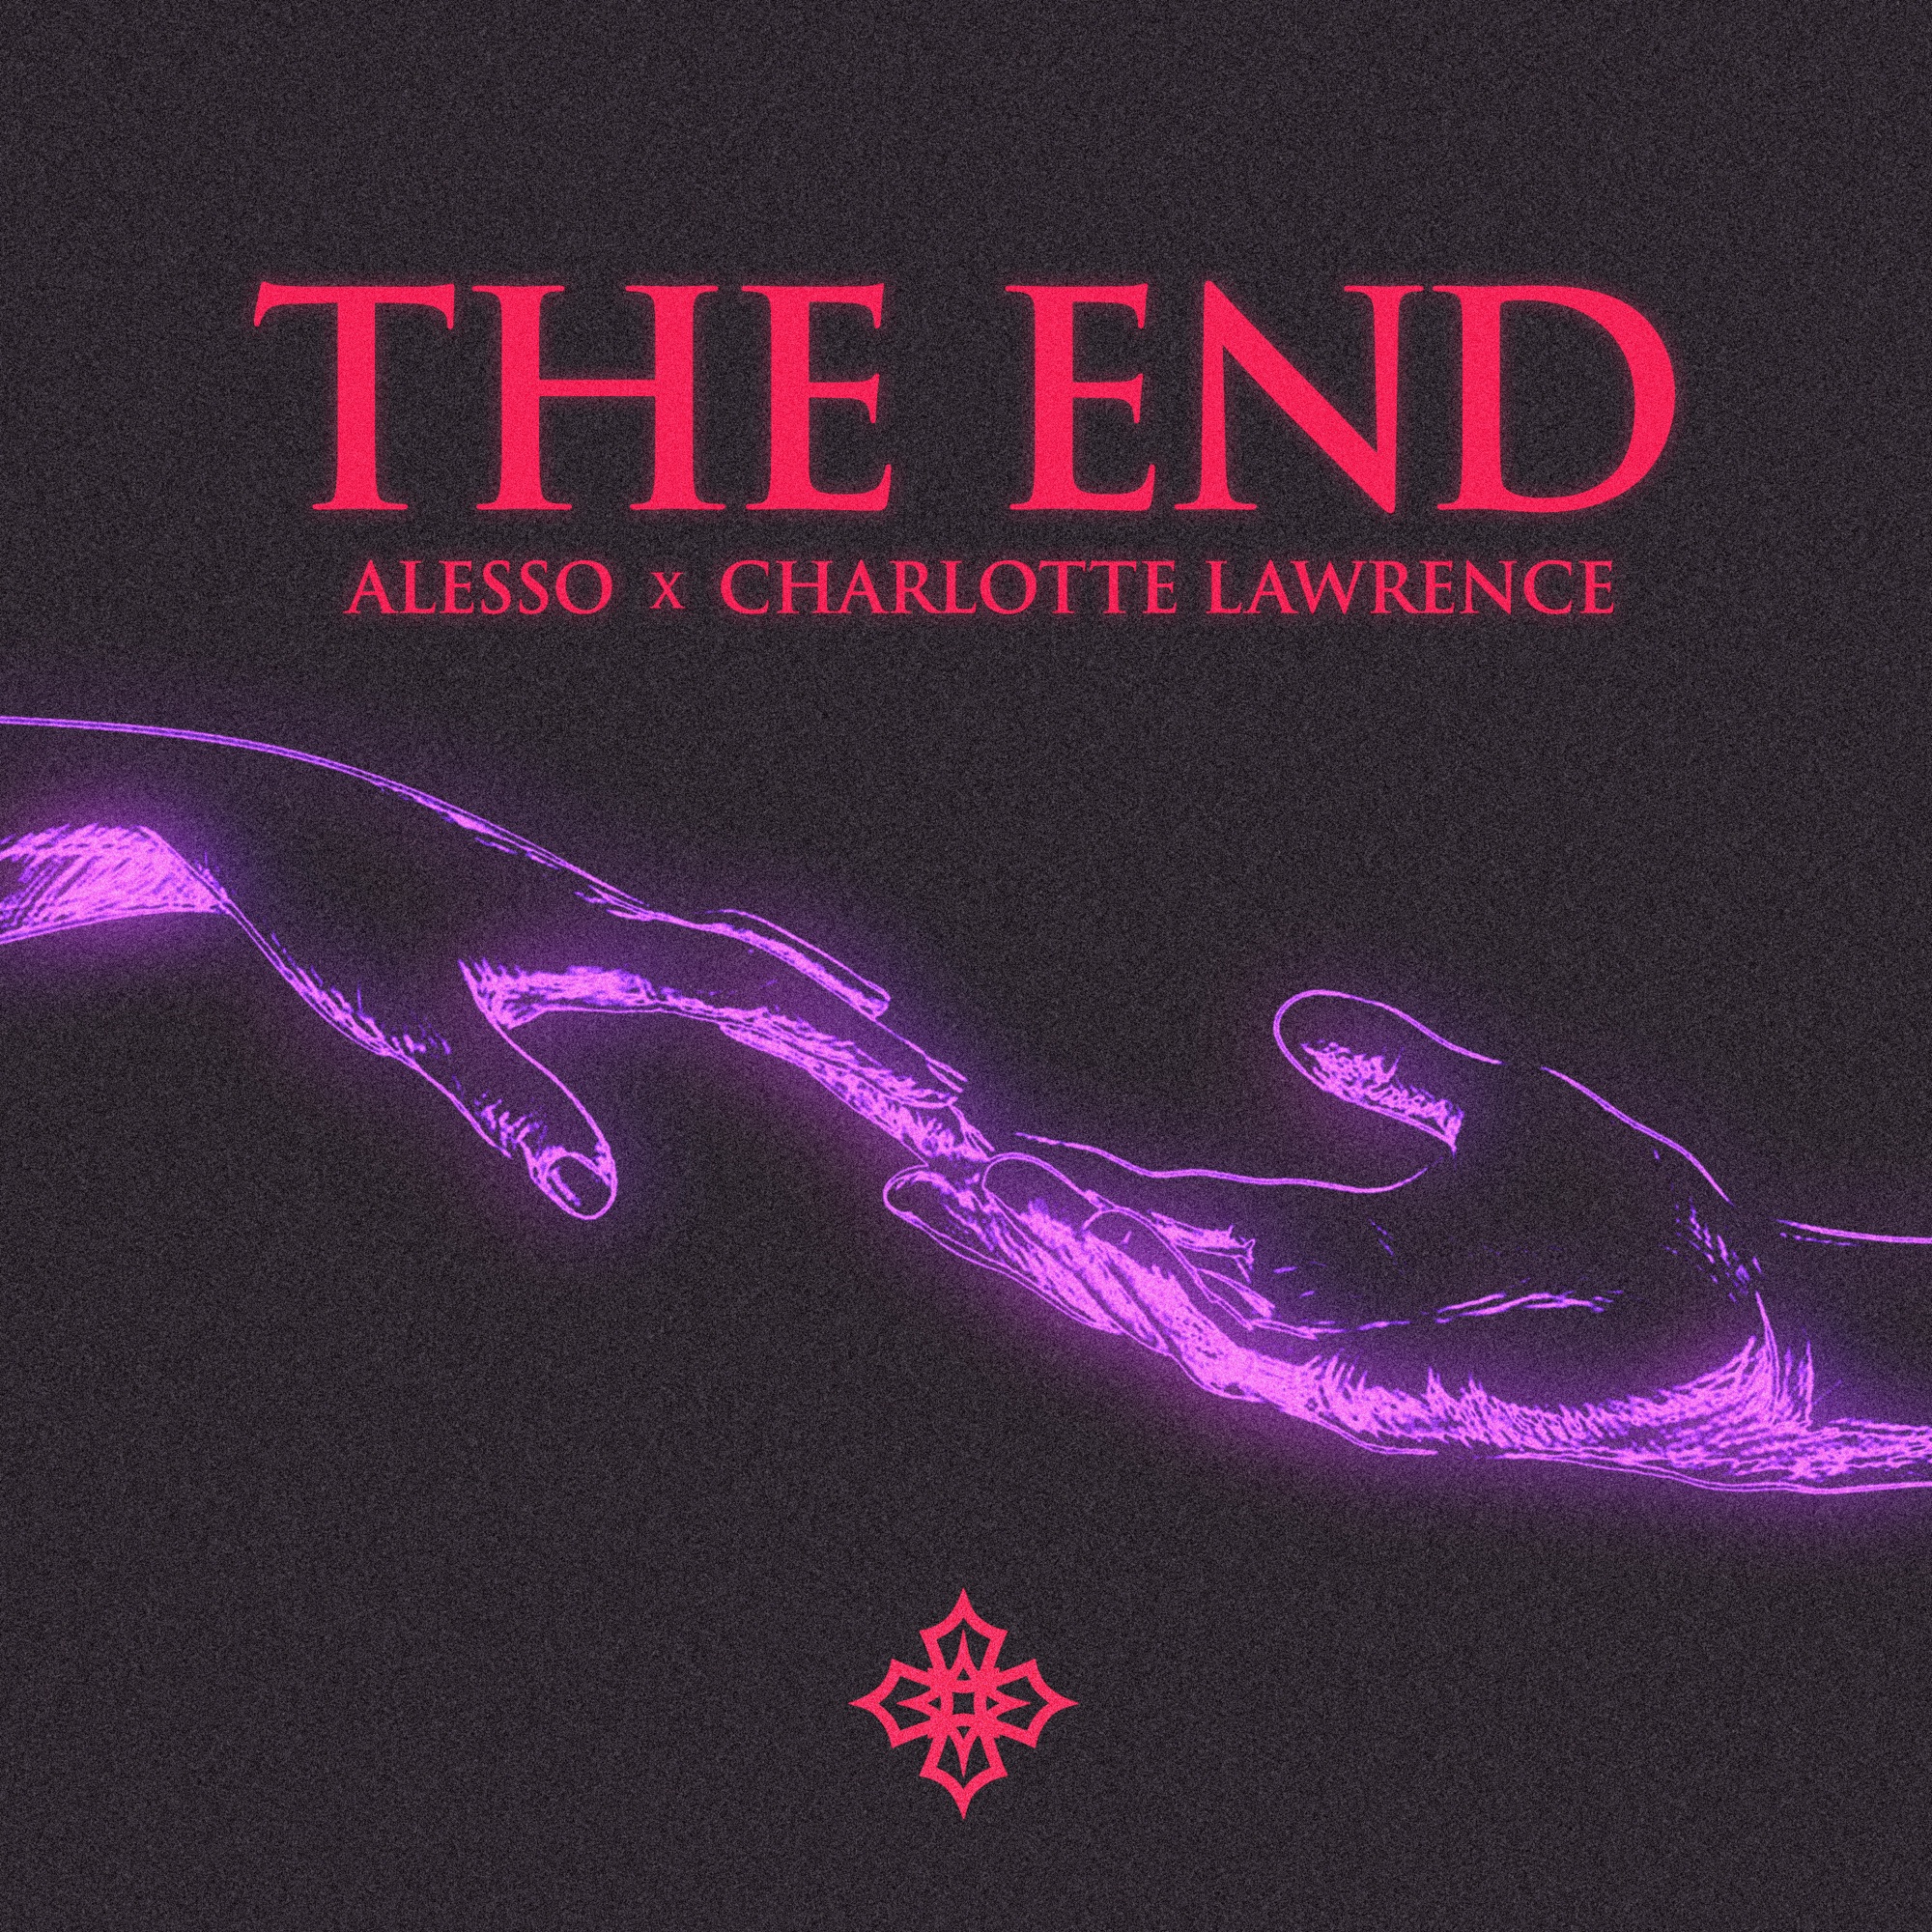 Alesso & Charlotte Lawrence - THE END - Single